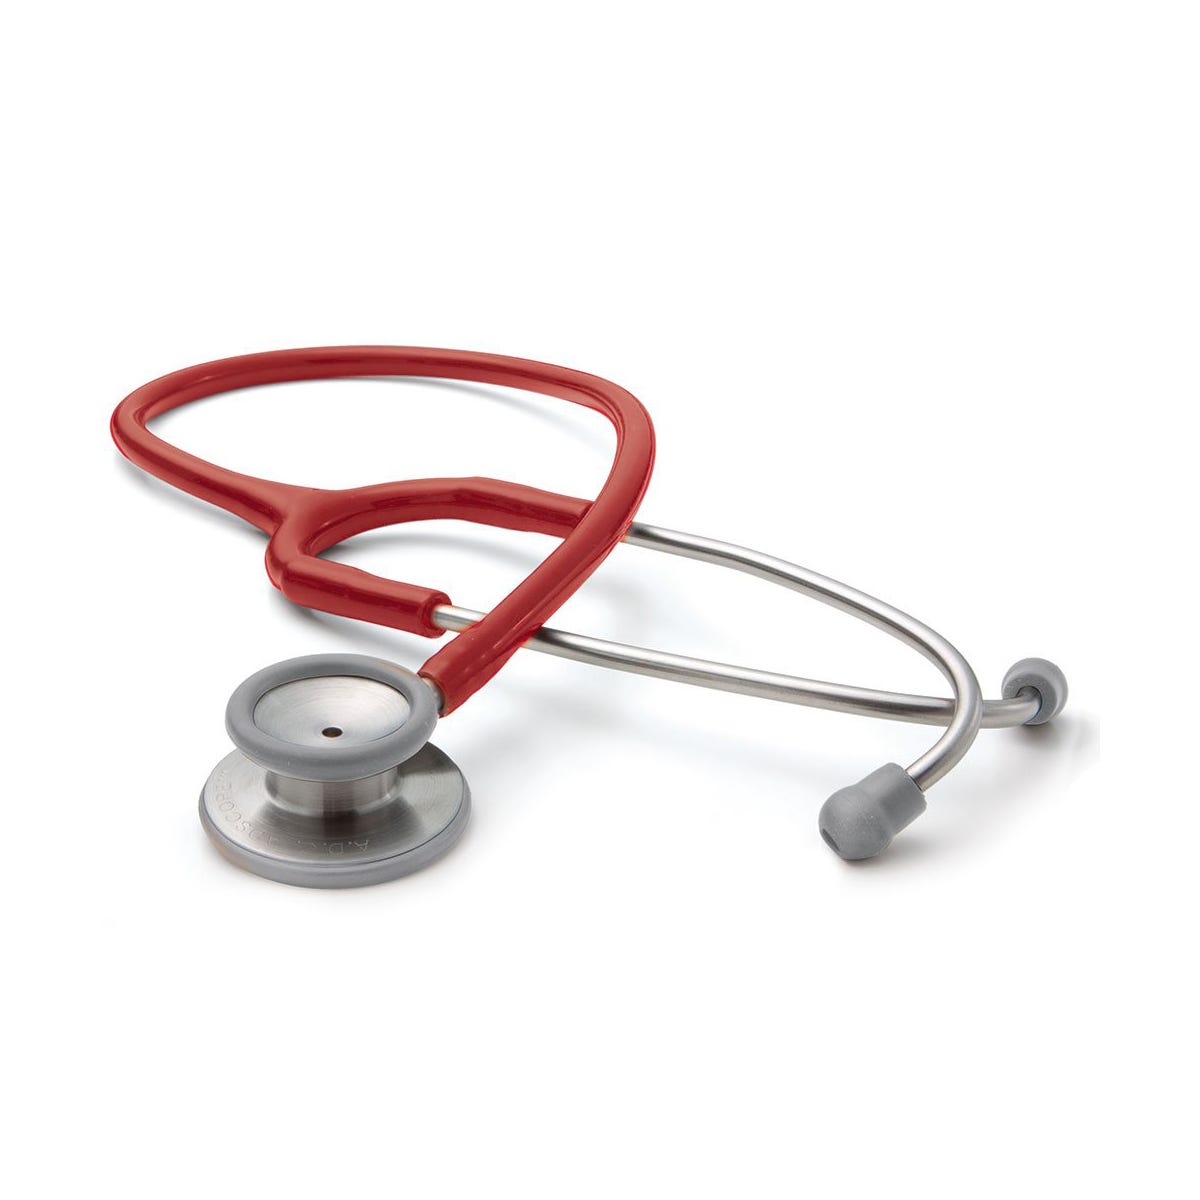 Adscope® Clinician Stethoscope Overall Length 30" Red